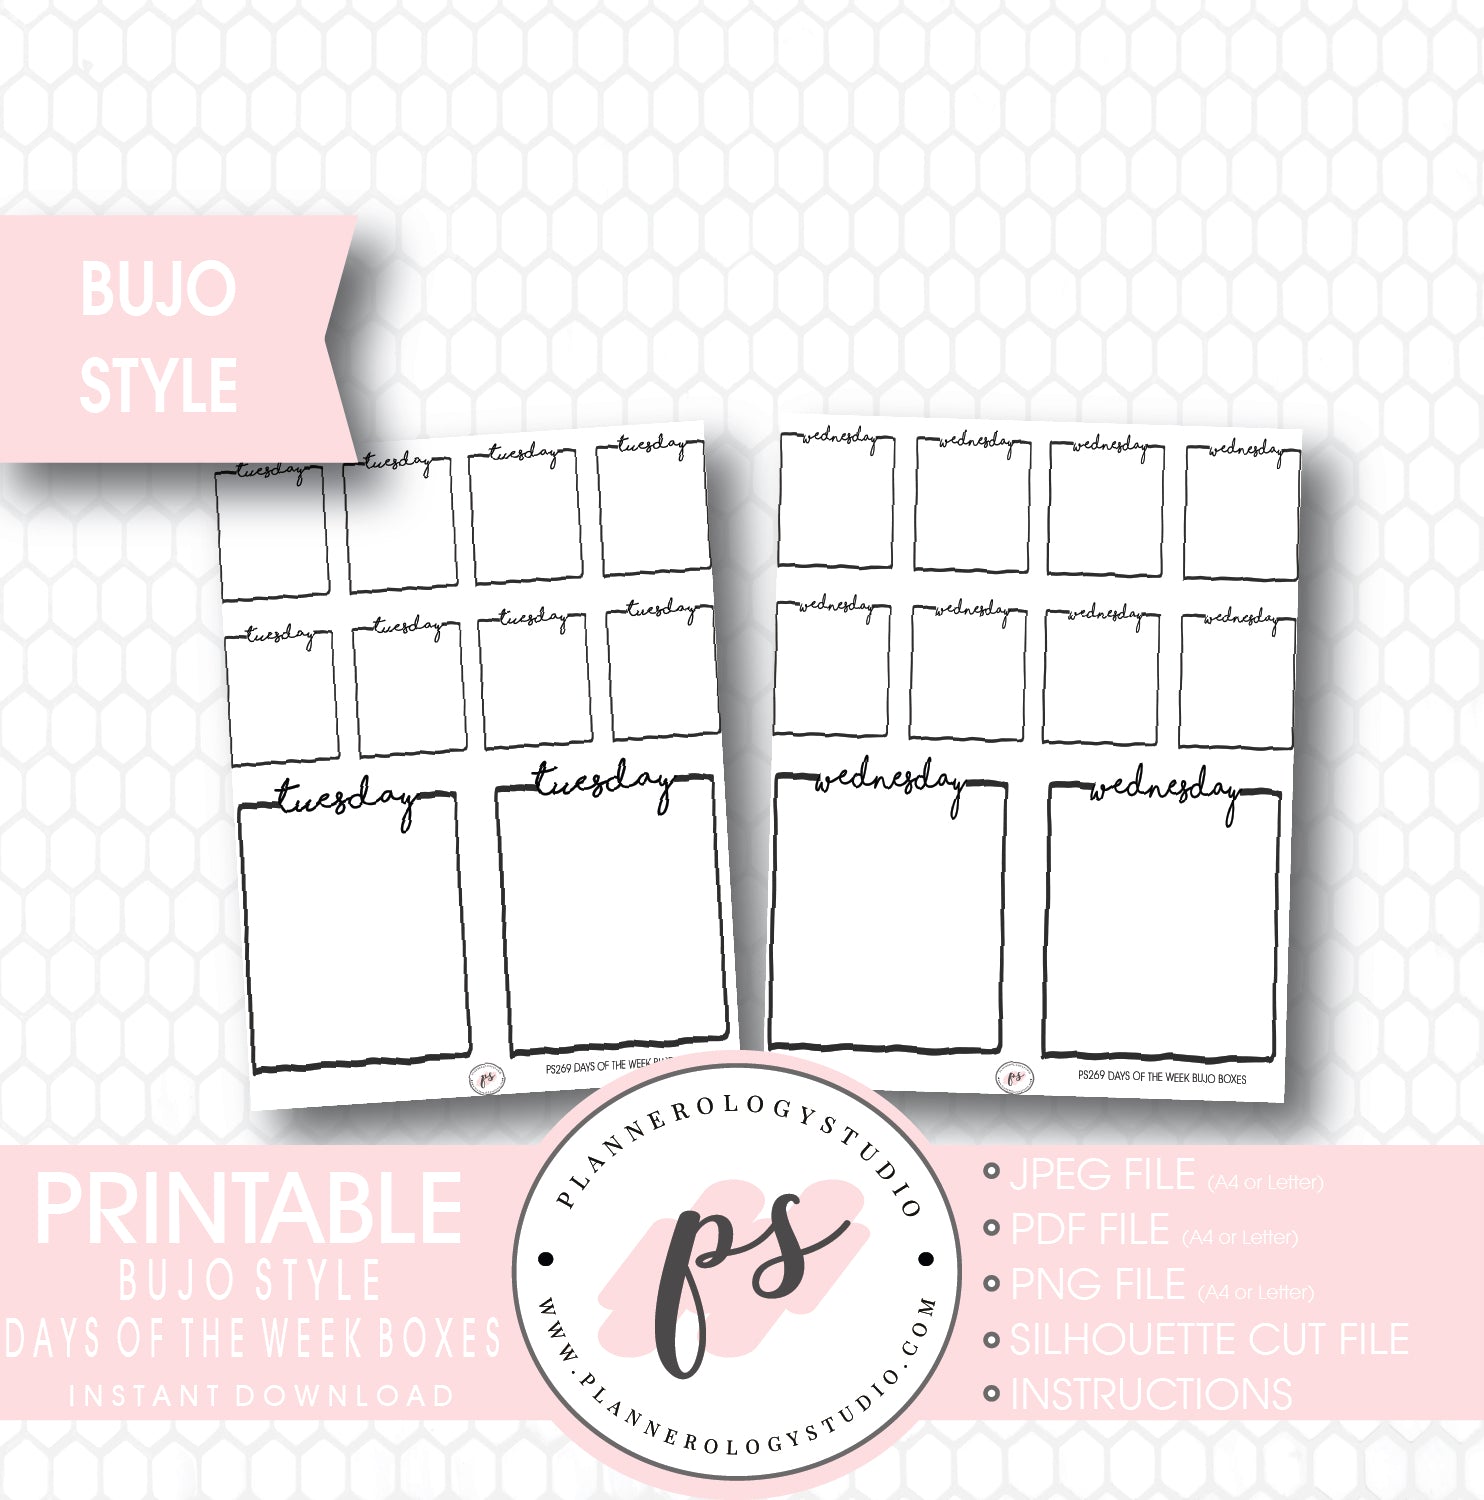 Bullet Journal Bujo Days of the Week (Monday to Friday) Boxes Printable Planner Stickers - Plannerologystudio